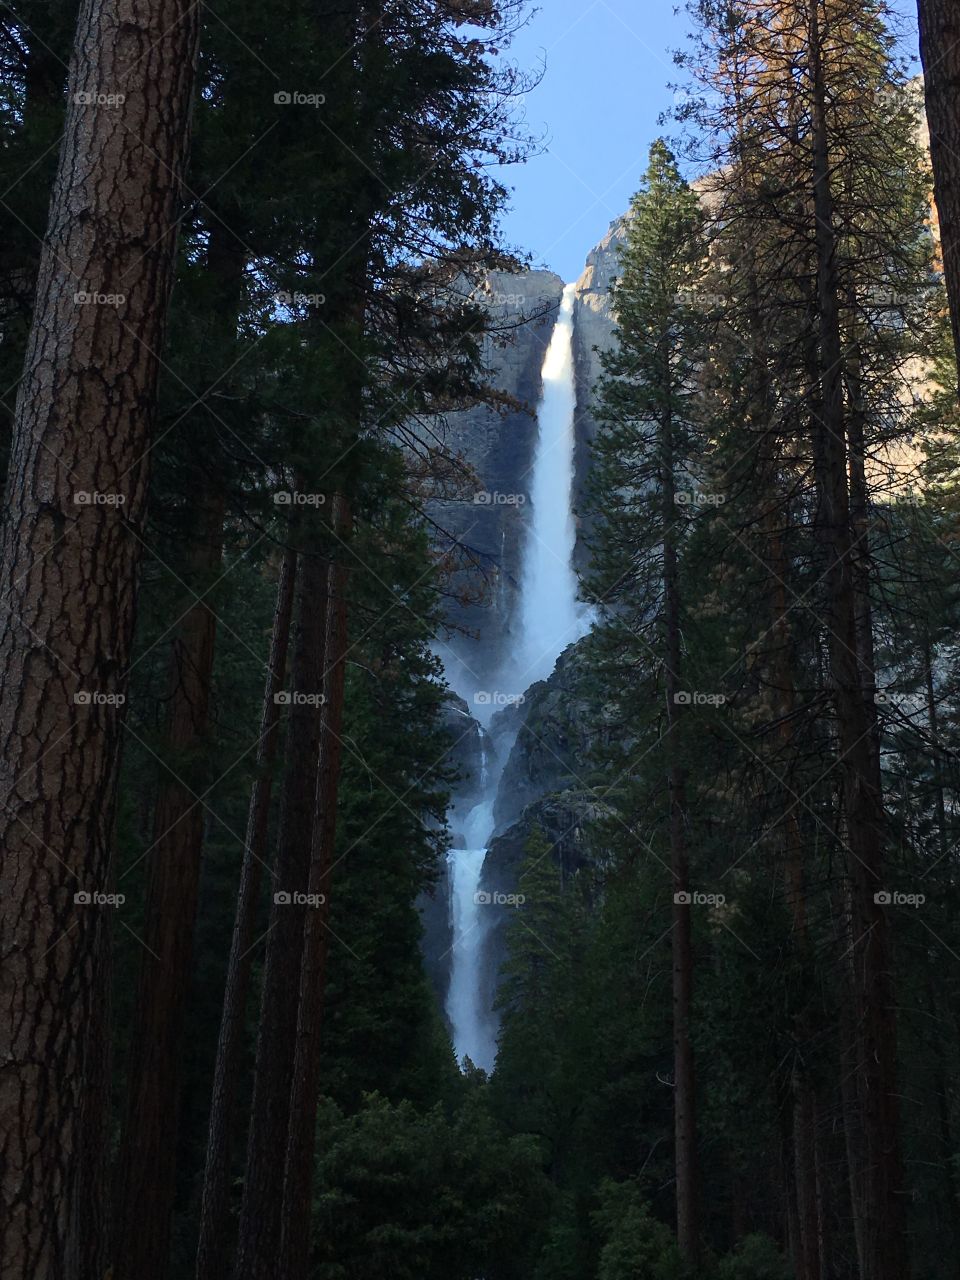 Upper and Lower falls in Yosemite National Park